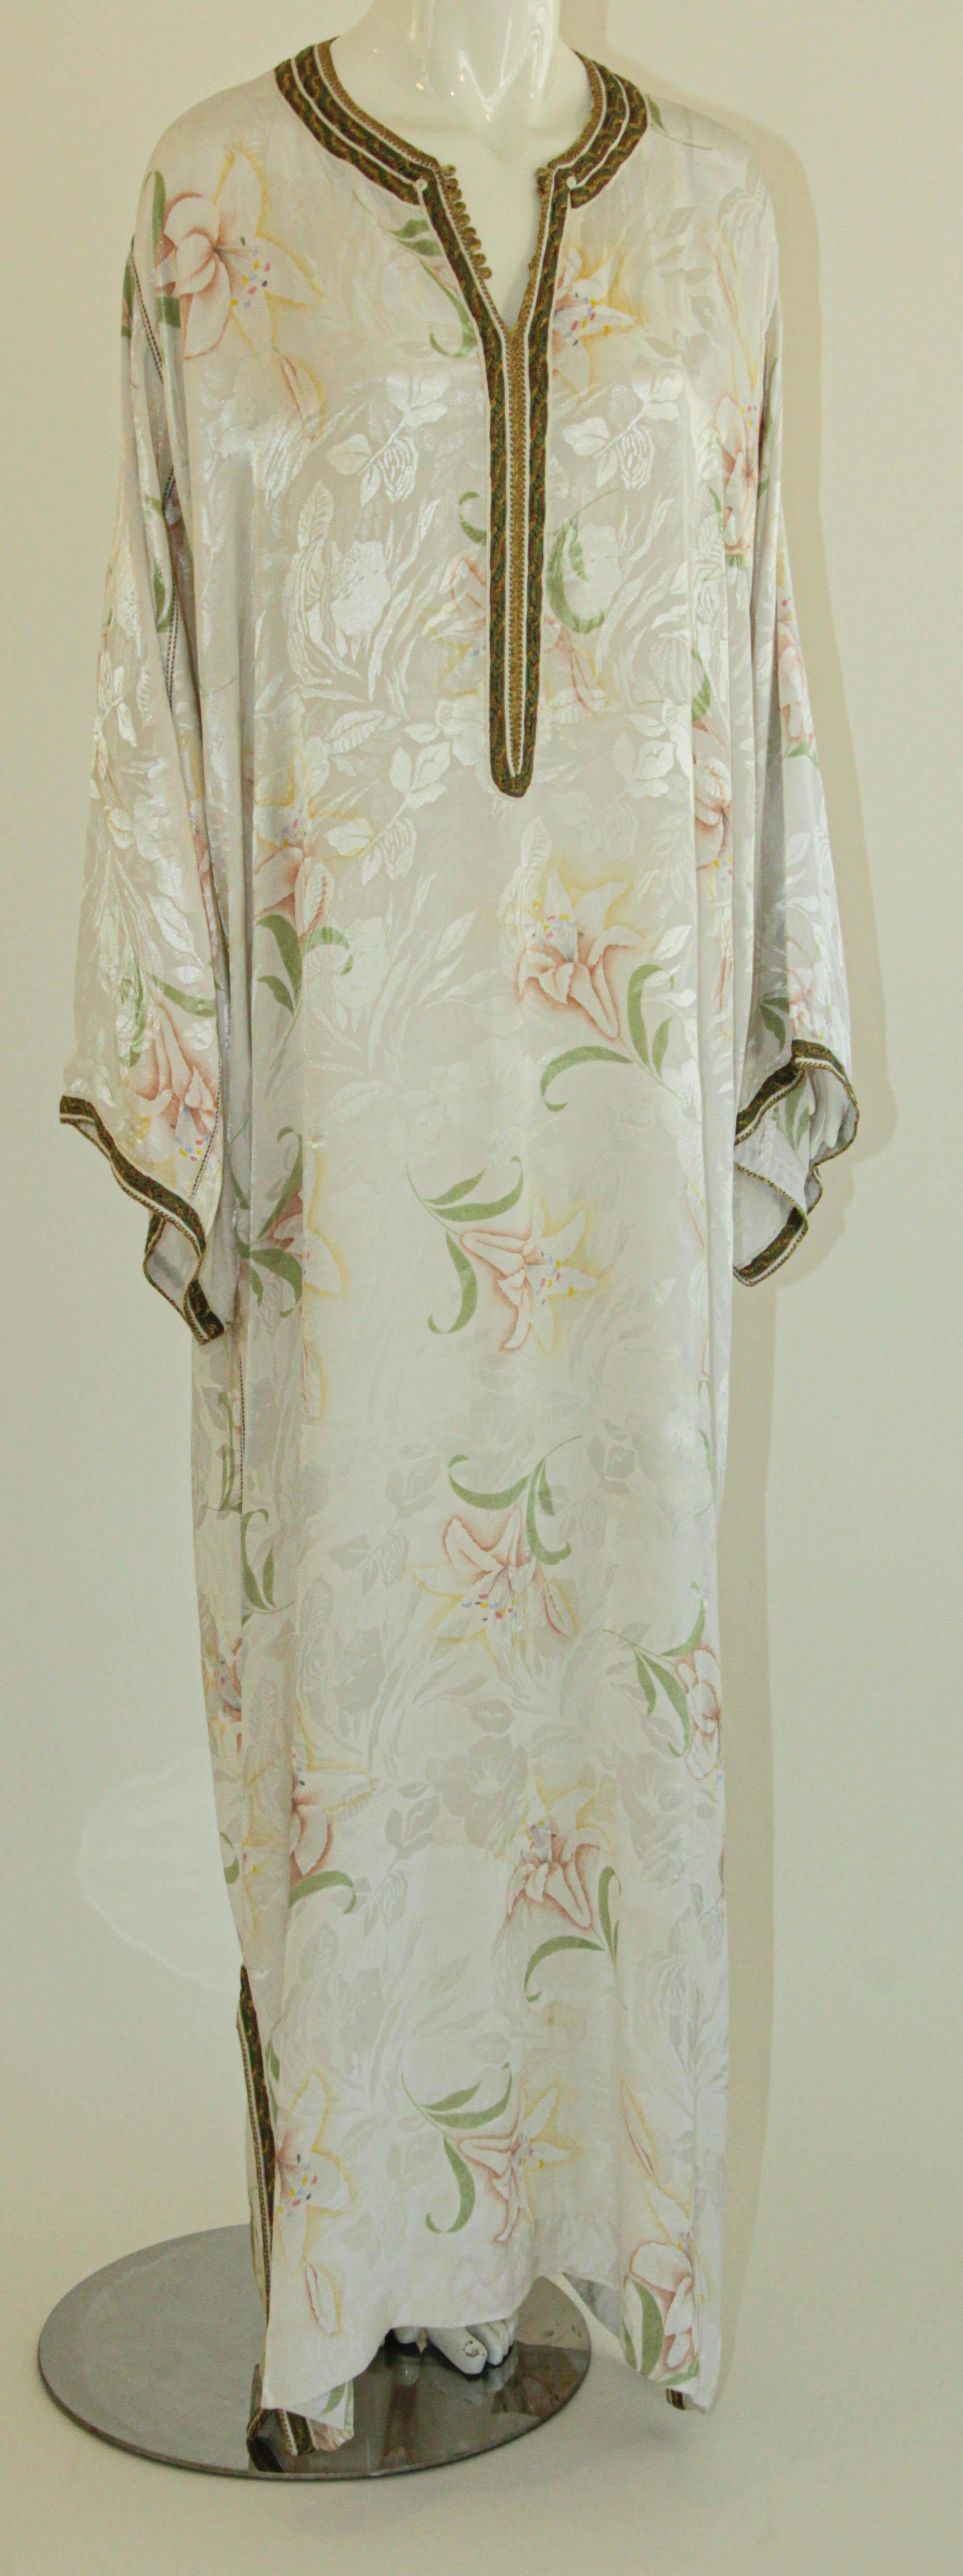 Women's or Men's Moroccan White Floral Caftan Set For Sale